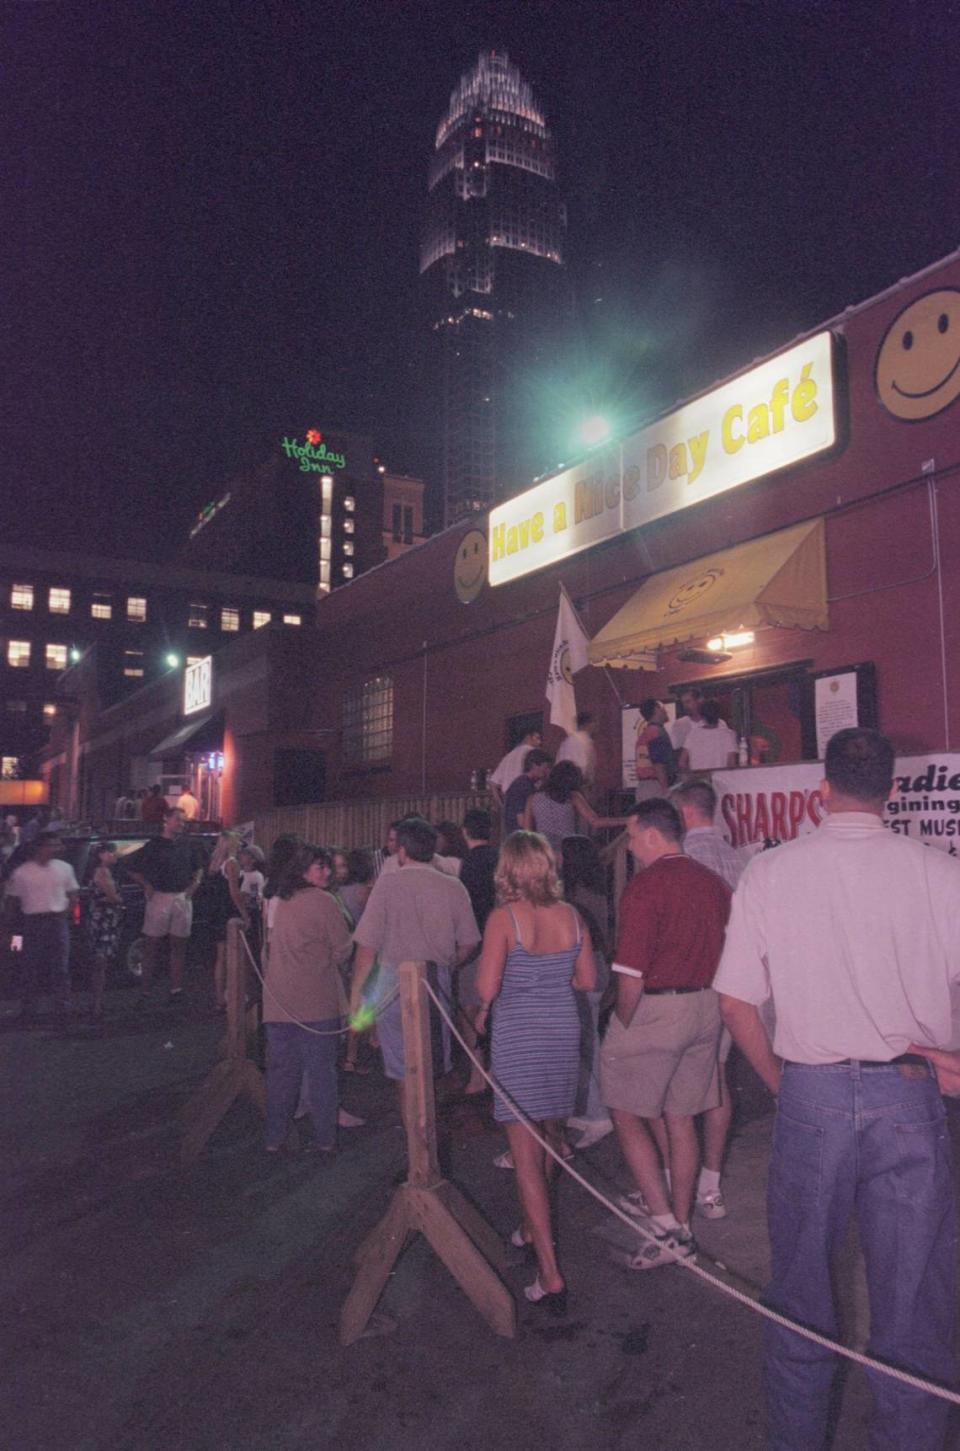 6/26/98 The NationsBank tower serves as a backdrop for a revitalized uptown entertainment and club scene Friday night. Once pronounced dead, the area has come back to life with bars, restaurants and clubs hopping every weekend. KENT D. JOHNSON/Charlotte Observer archives